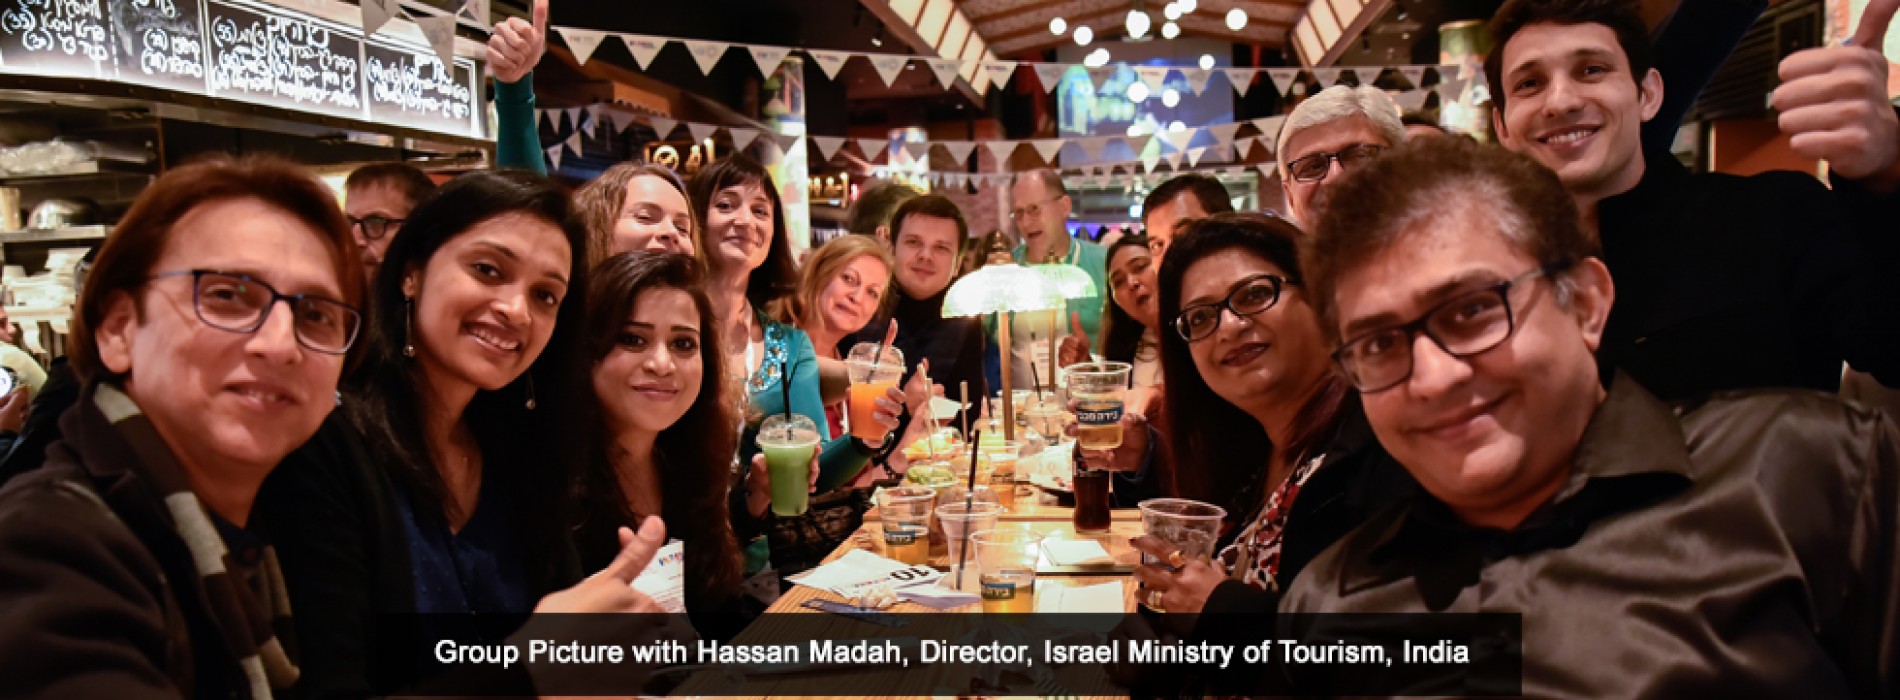 Israel Ministry of Tourism hosts 130 travel agents from 17 countries for the 7th Israel ‘Where Else’ Tourism Conference